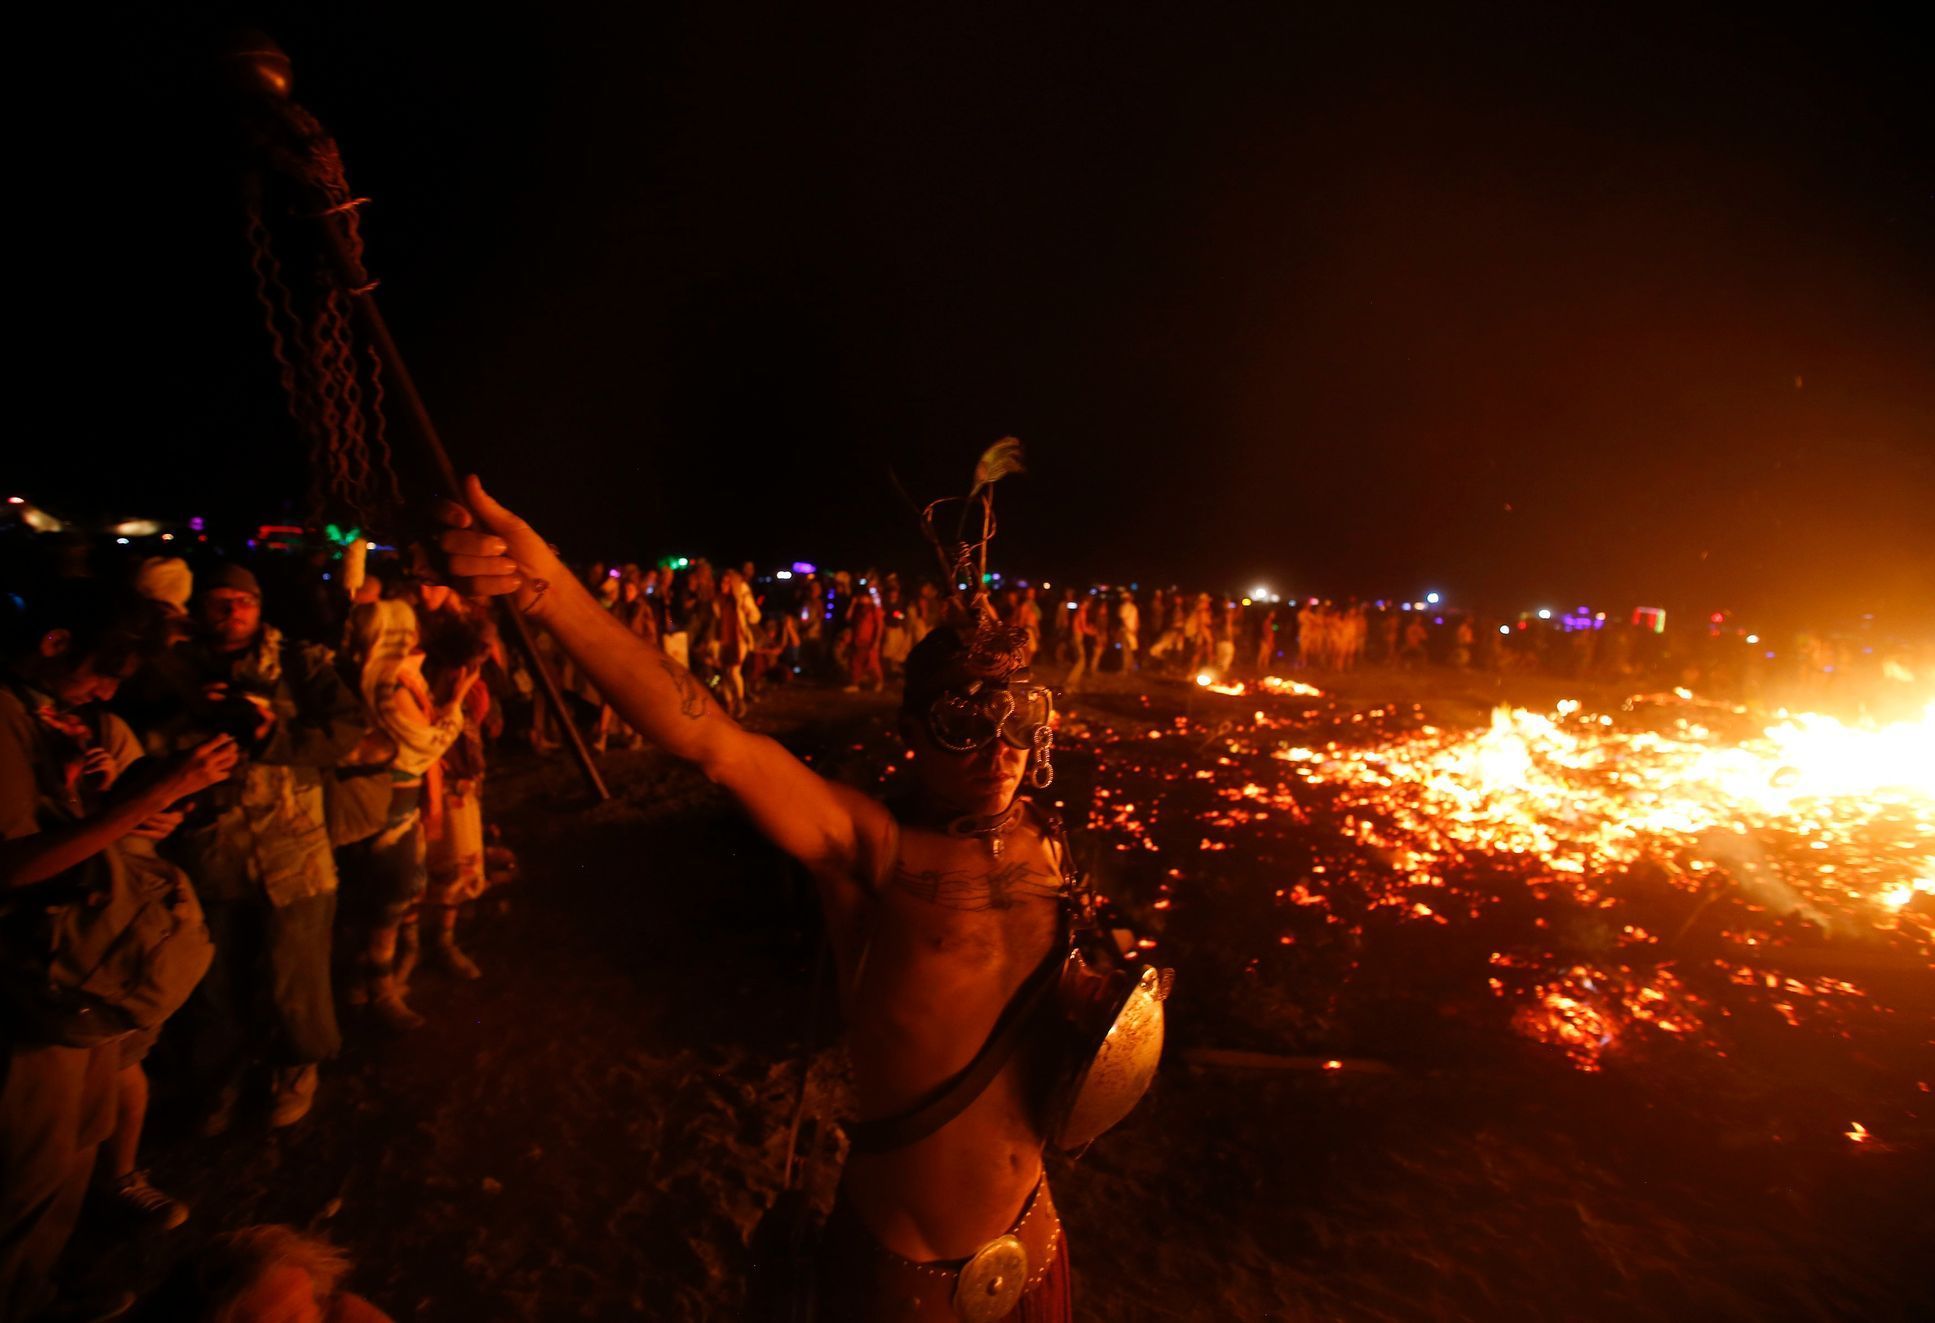 A participant dances as the Temple of Grace burns on the last day of the Burning Man 2014 &quot;Caravansary&quot; arts and music festival in the Black Rock Desert of Nevada